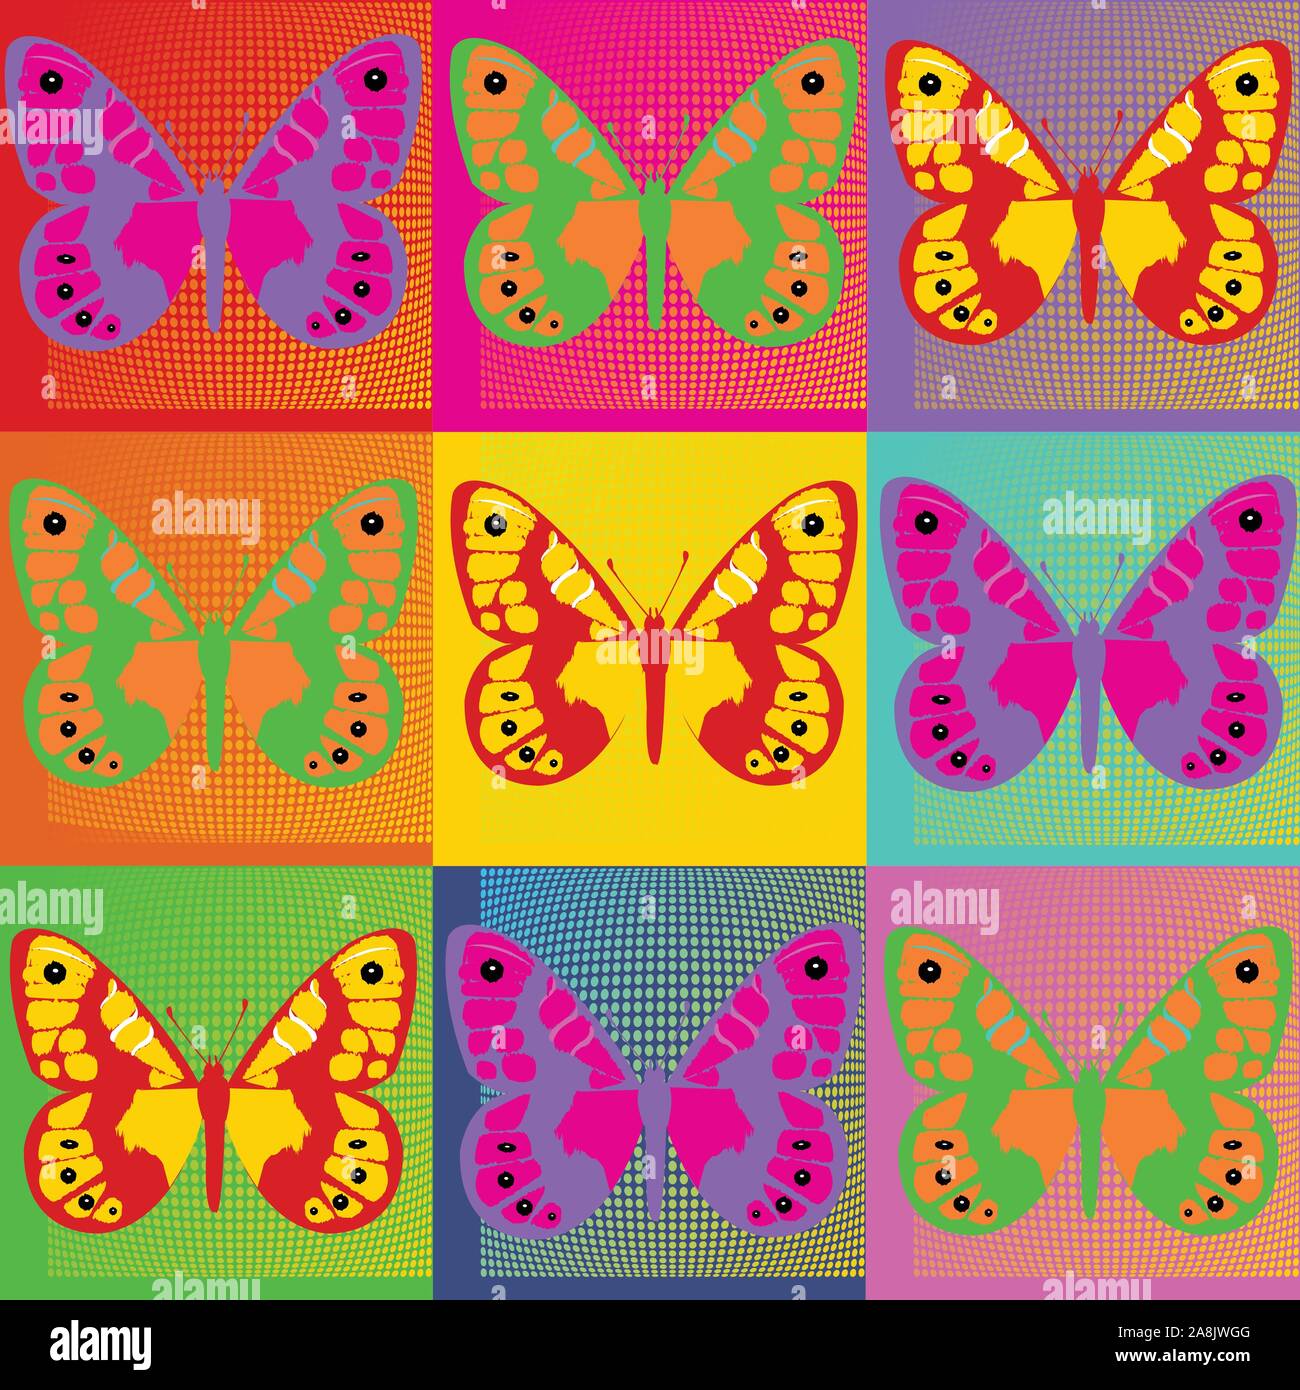 Pop Art Andy Warhol background illustration with butterflies, vector Stock Vector